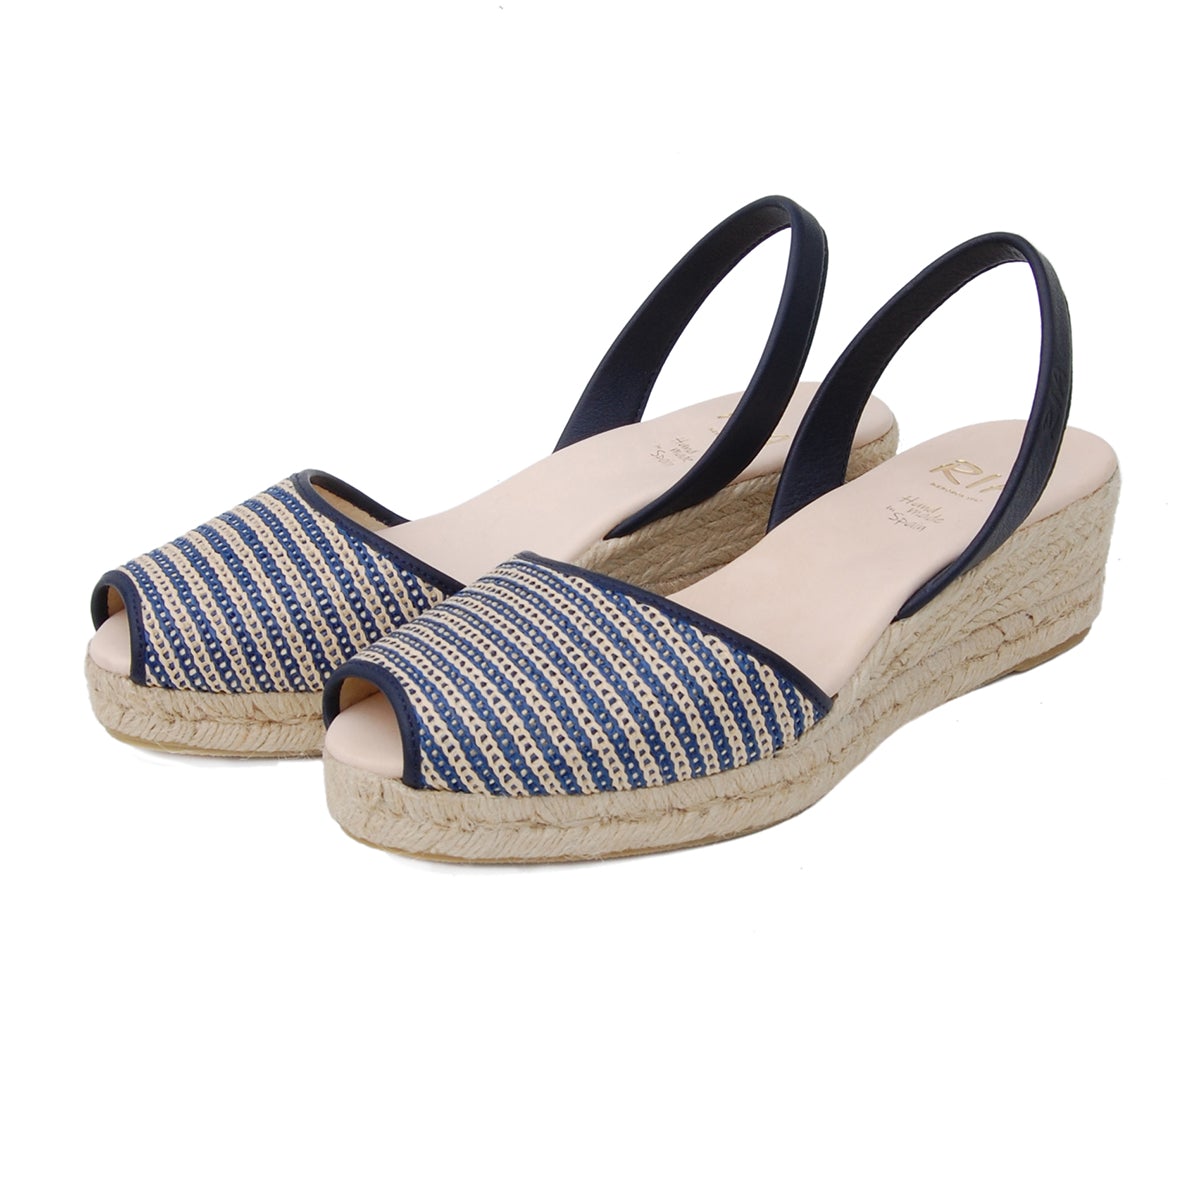 Parallel Culture Shoes and Fashion Online SHOES RIA MENORCA PALMA WEDGE